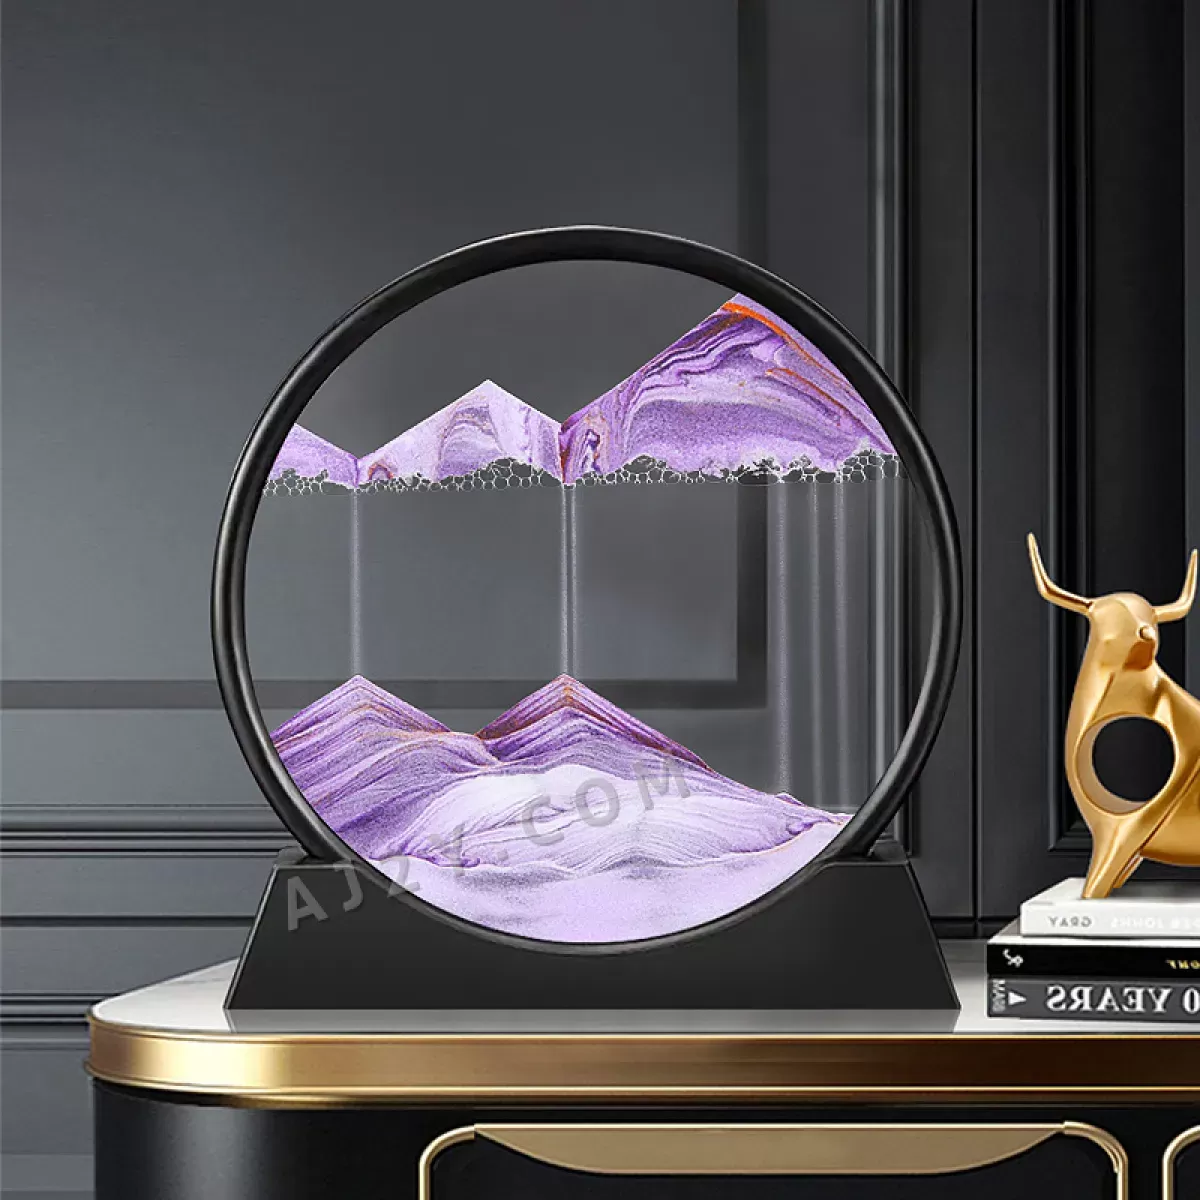 3D Moving Sand Art Picture Round Glass Deep Sea Sandscape Hourglass Quicksand Craft Flowing Sand Painting Office Home Decor Gift How Much Is